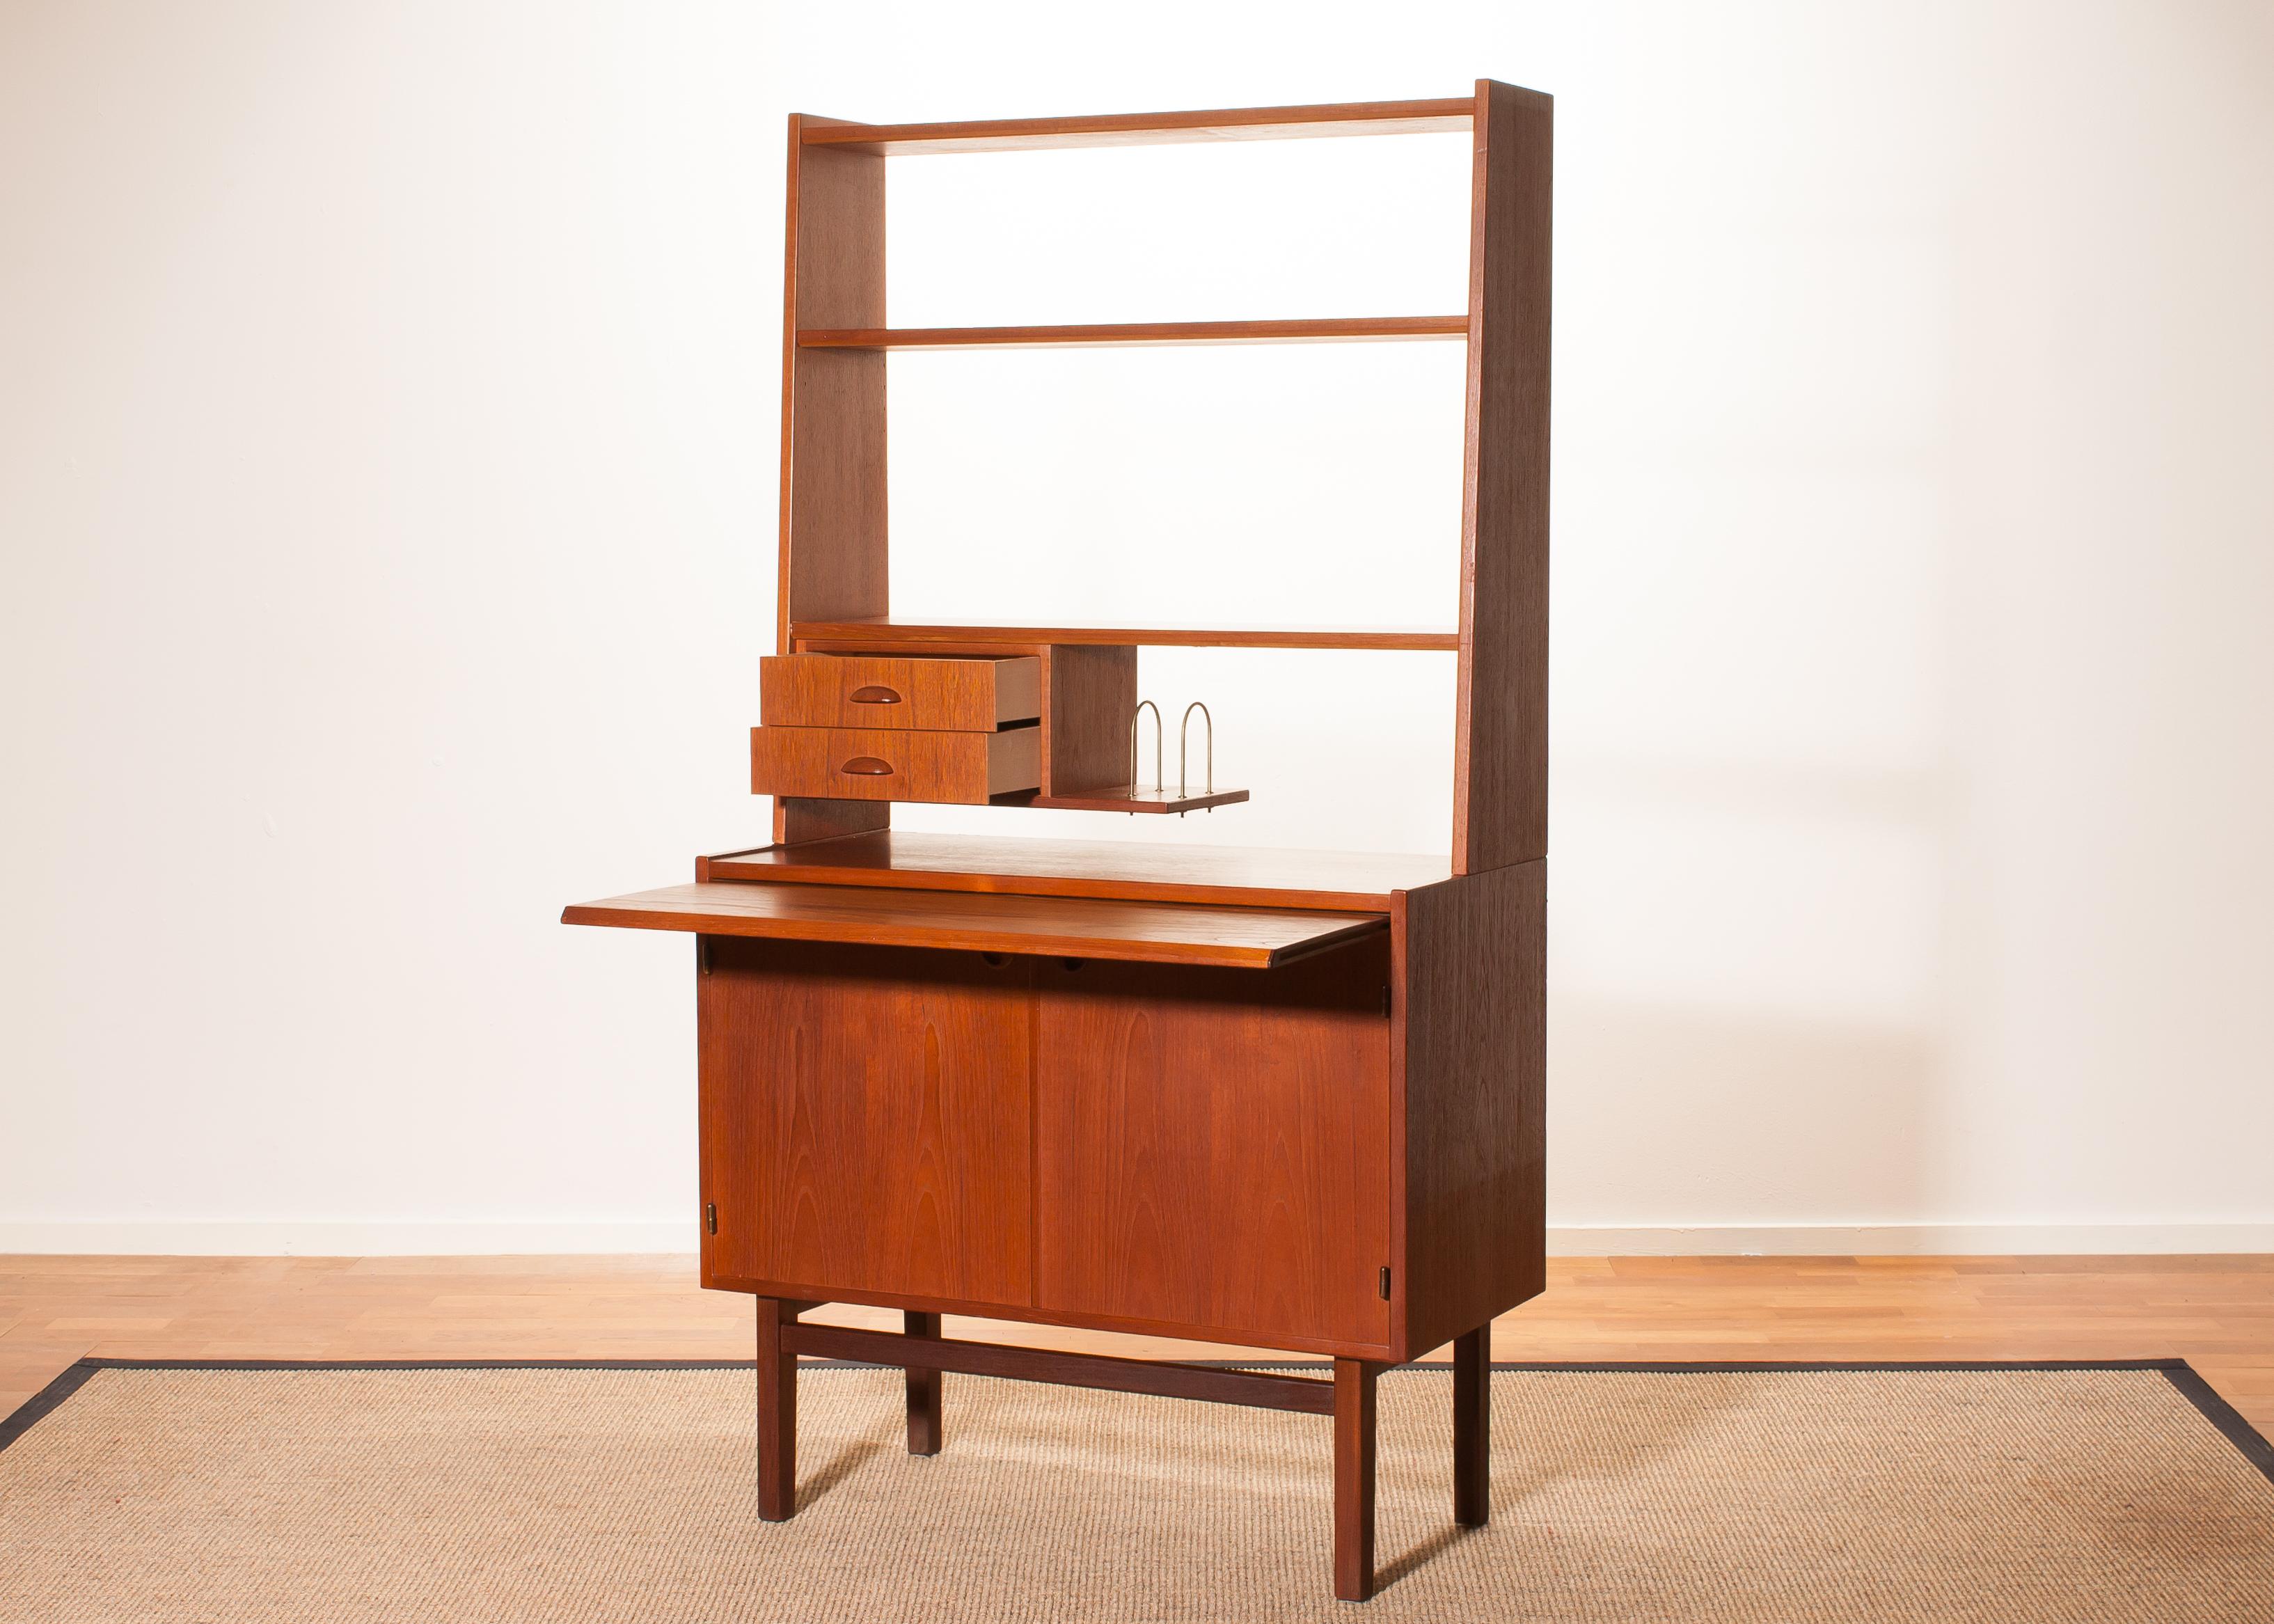 Beautiful secretaire made by Hovmantorp, Sweden.
This cabinet is made of teak and is in a very nice condition.
It has an extensible writing space.
Period 1950s.
Dimensions: H 157 cm, W 85 cm, D 41 cm (D 68 cm with the writing tablet